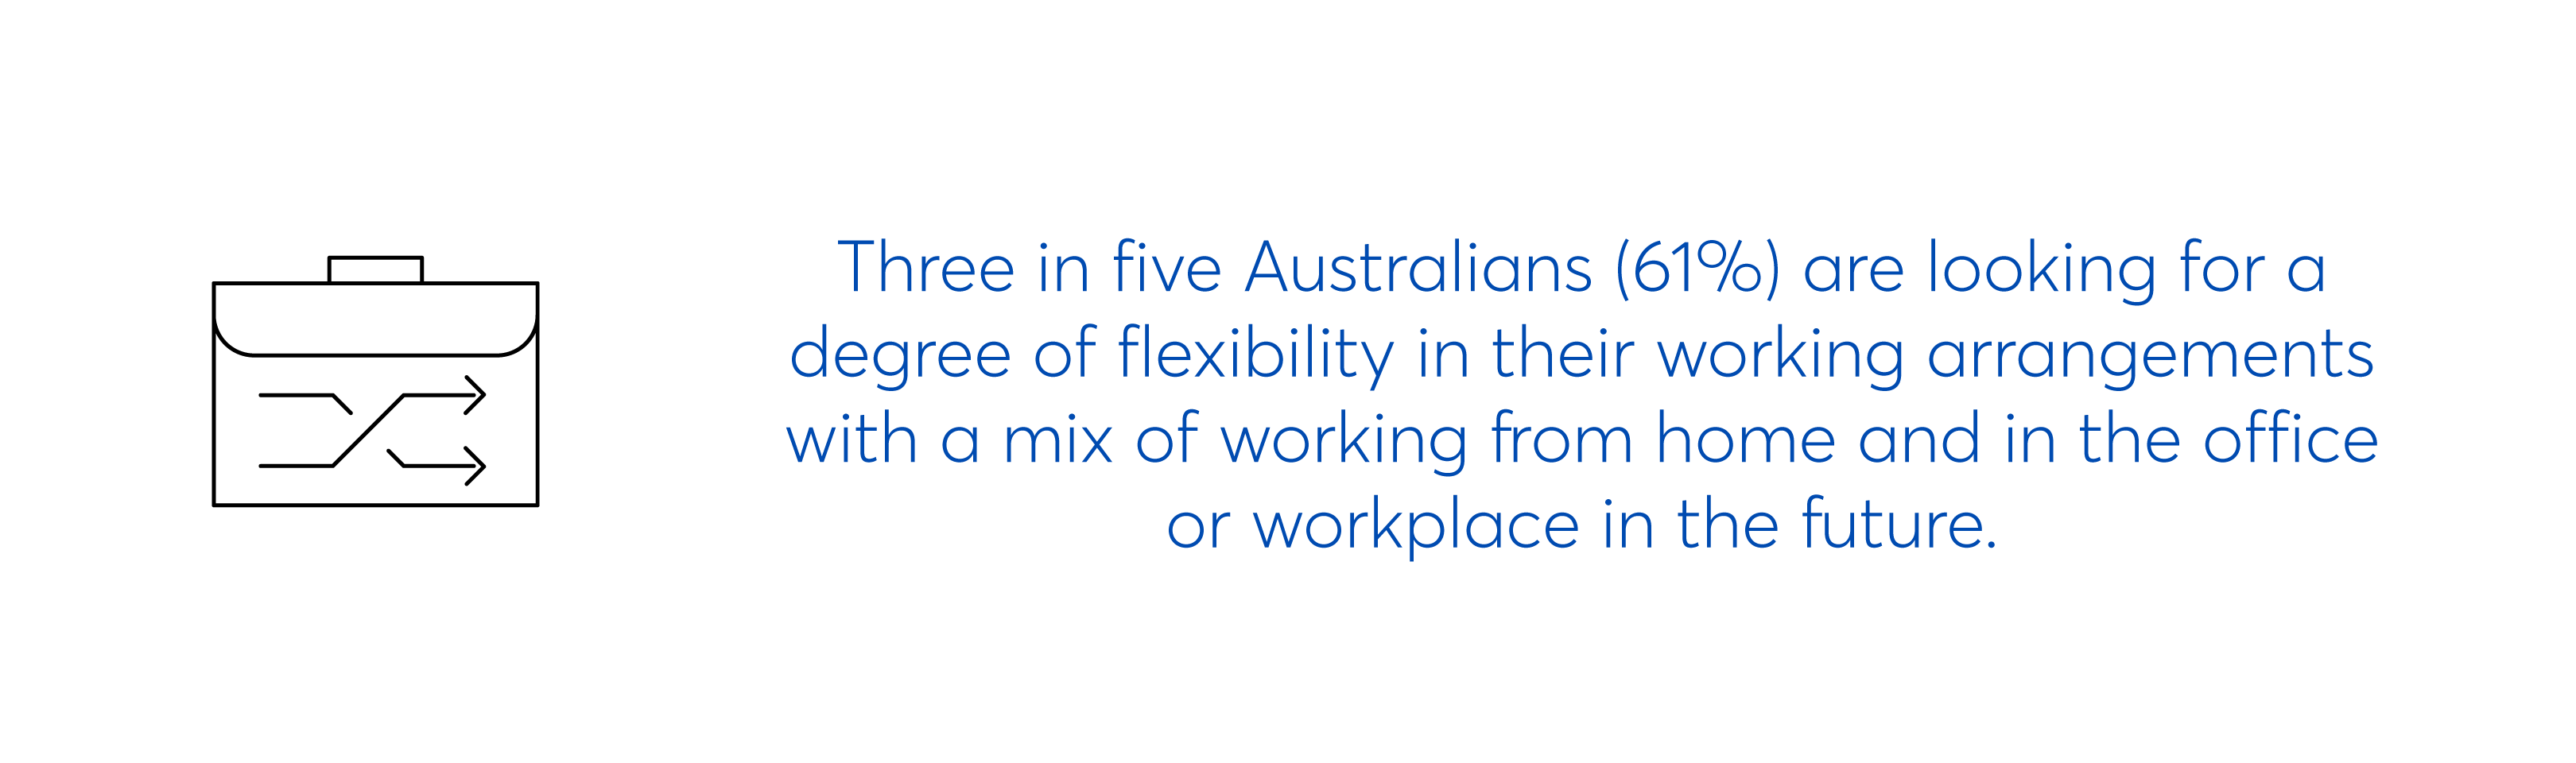 61% of Aus are looking for a degree of flexibility